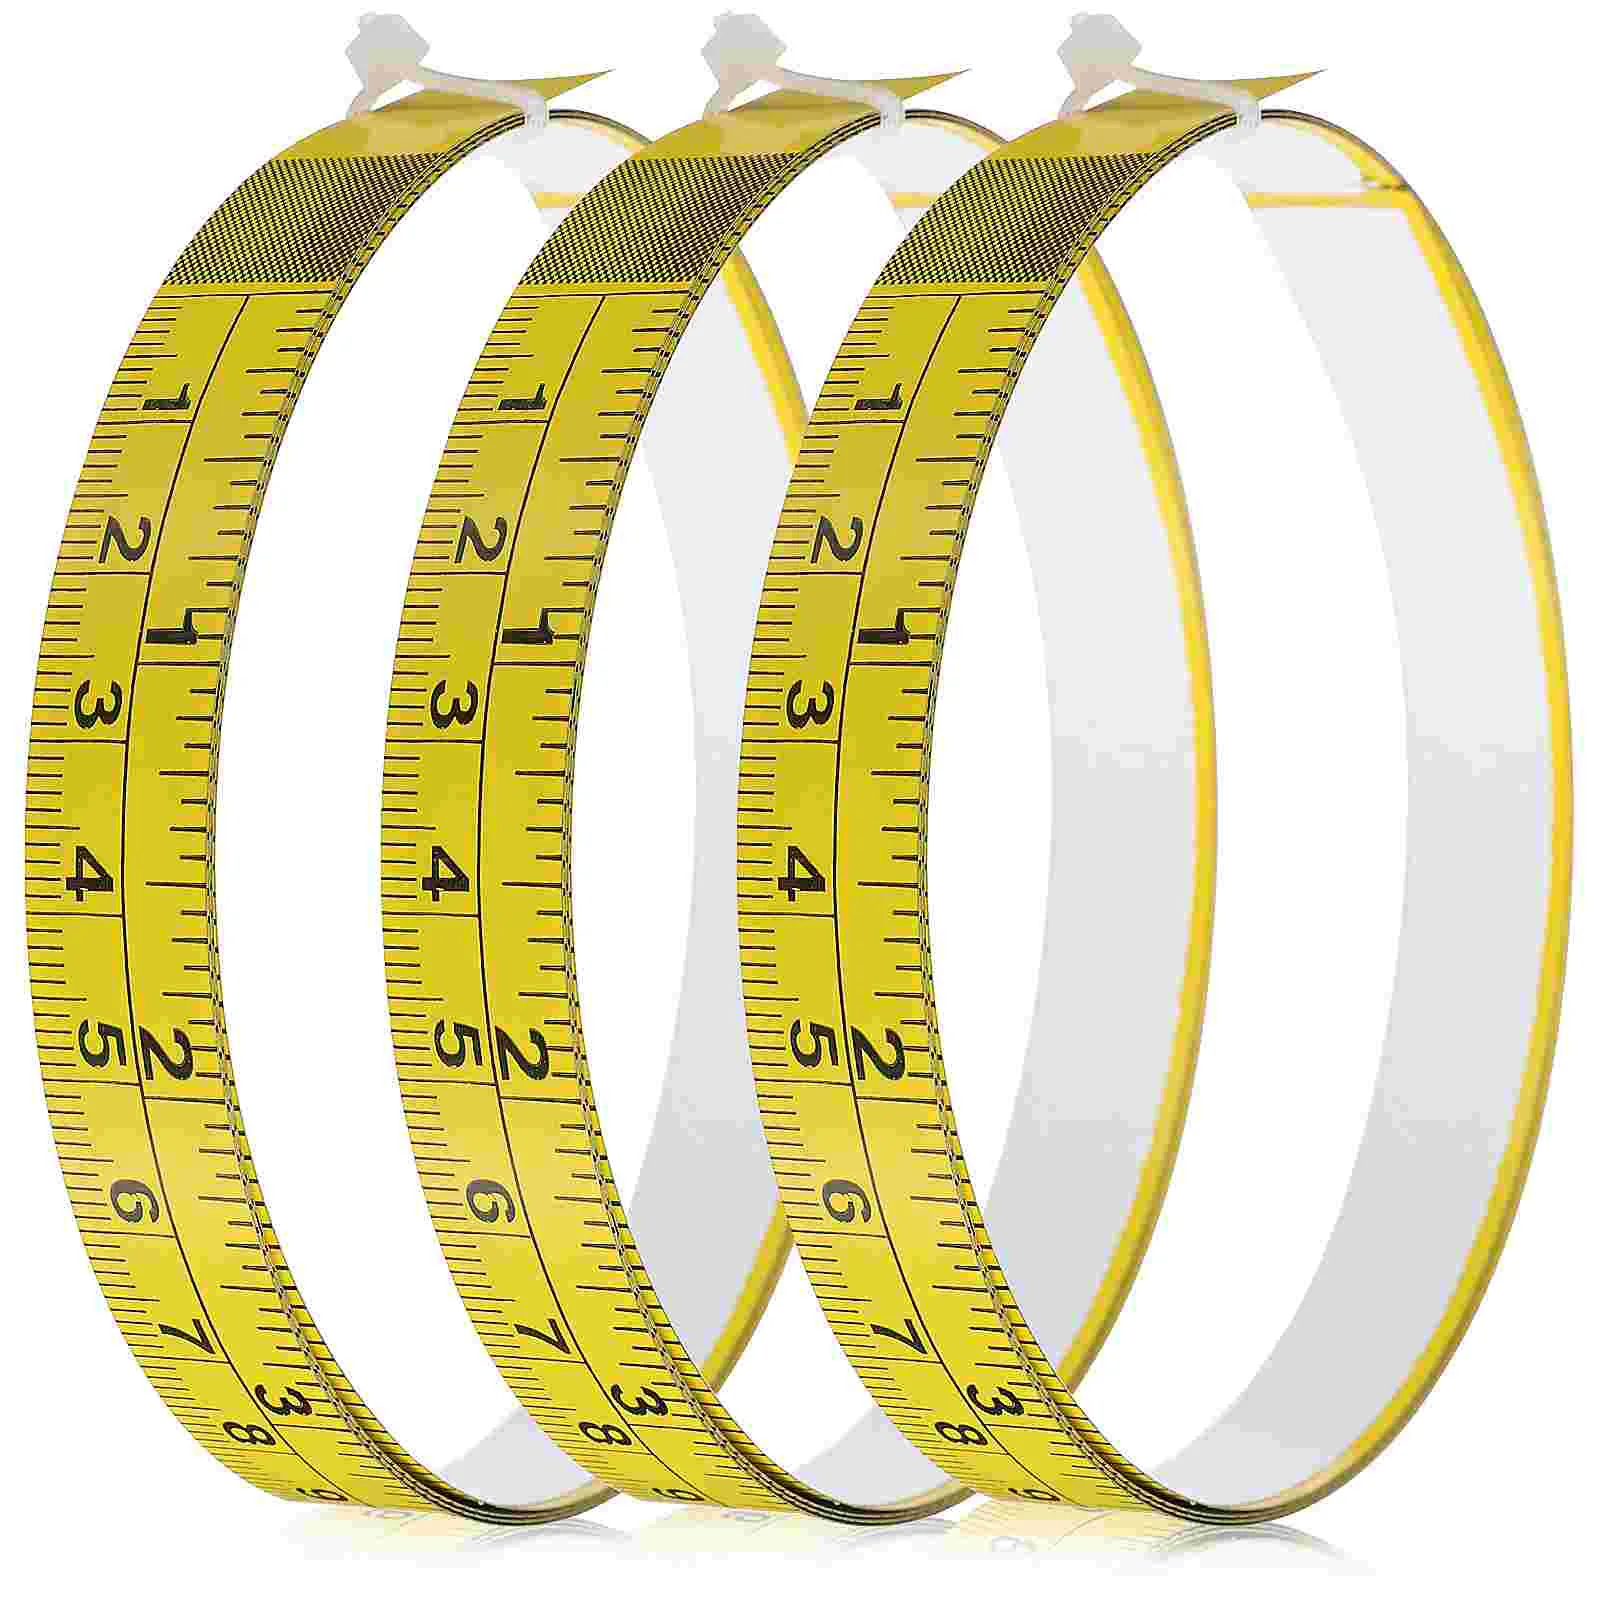 

3 Pcs Self-Adhesive Measuring Tapes Imperial and Metric Scales Workbench Rulers Sticky Measure Tapes with Adhesive Backing